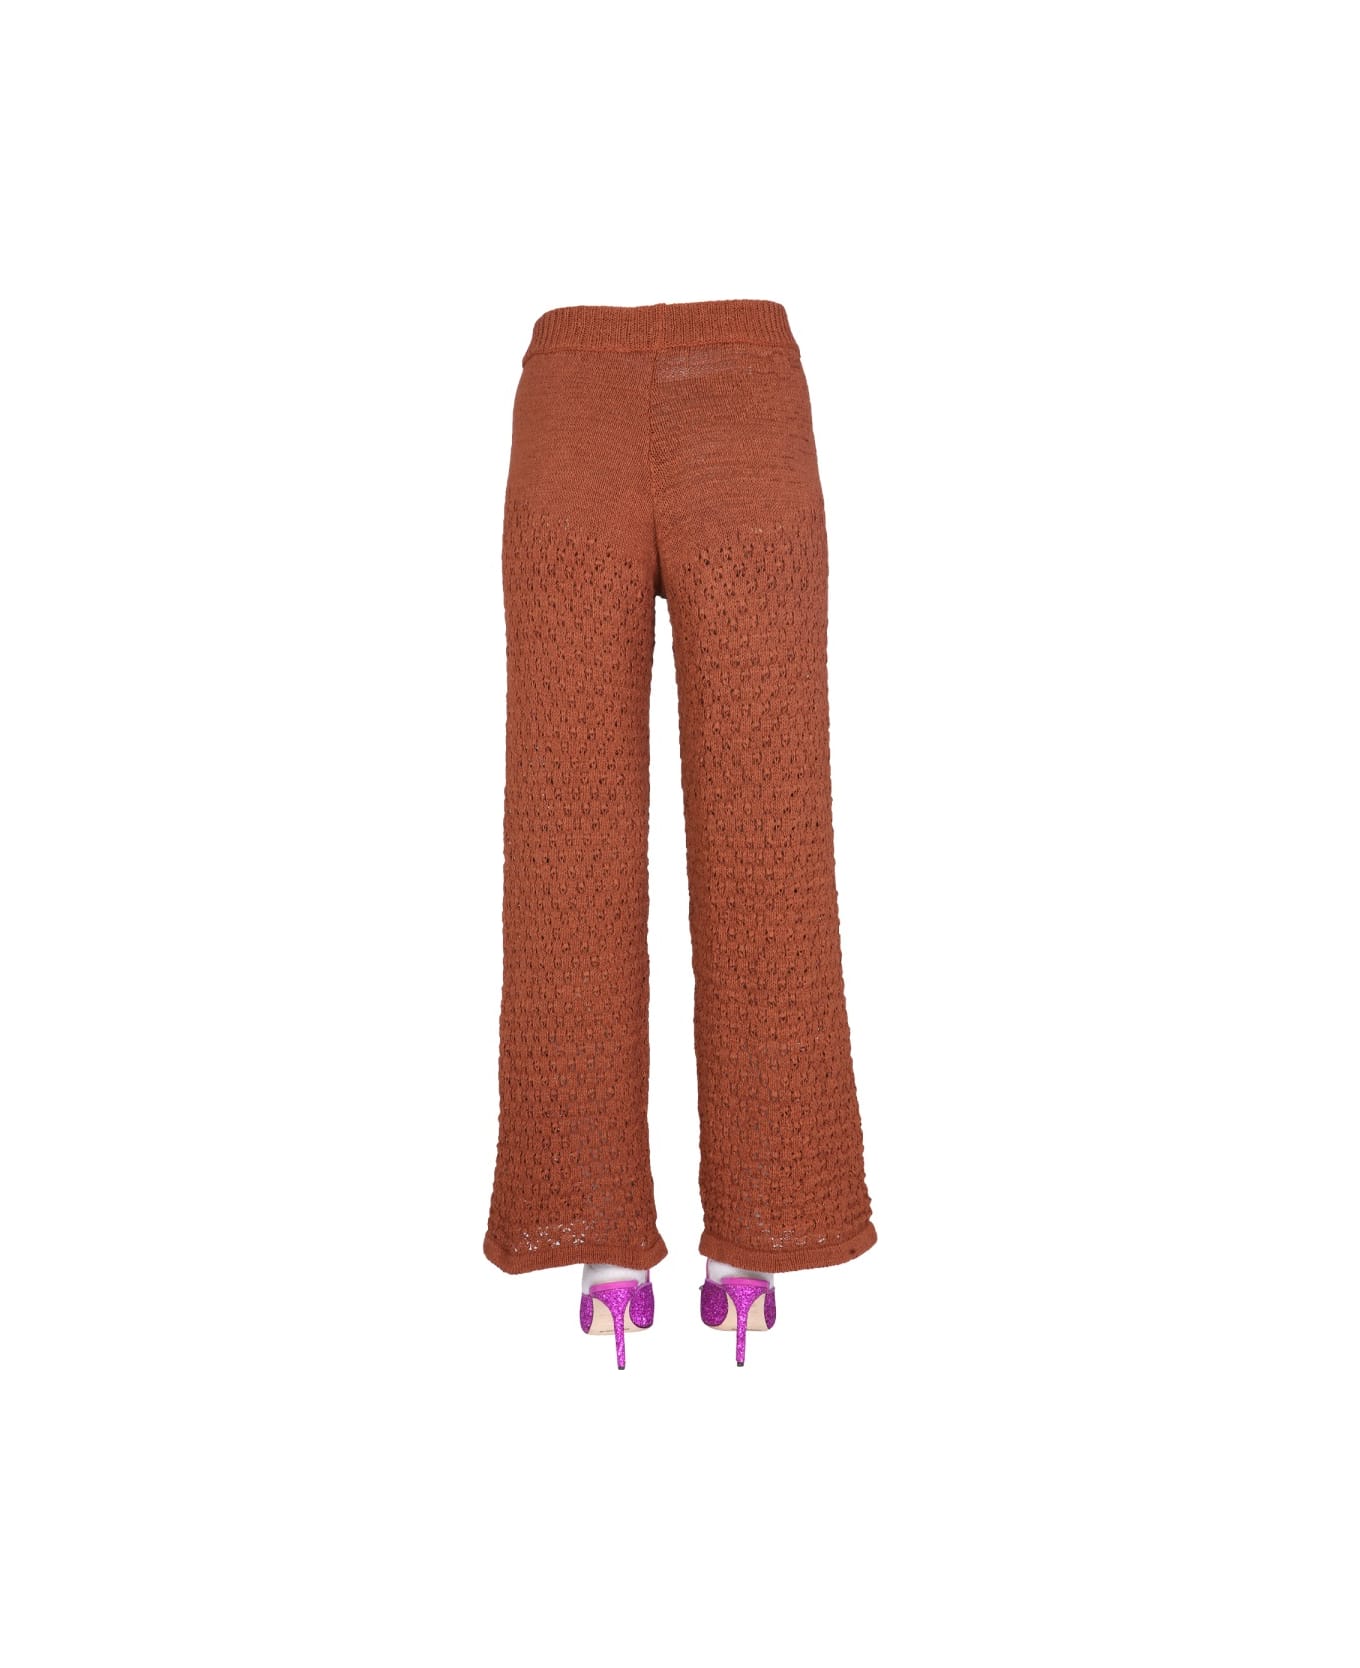 Rotate by Birger Christensen "calla" Knit Trousers - BROWN